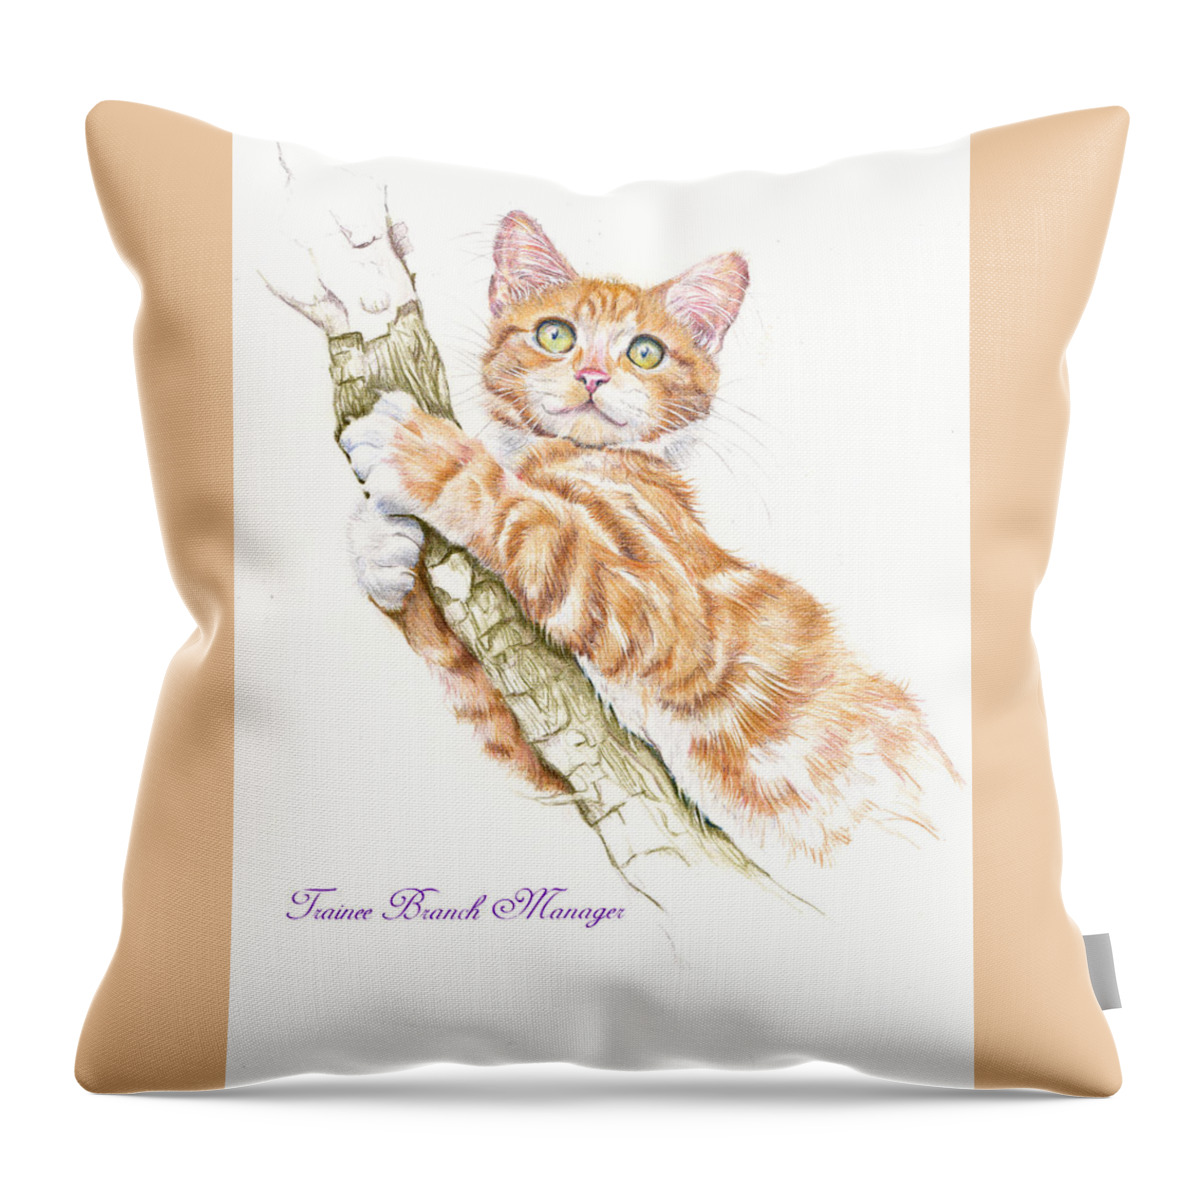 Cat Throw Pillow featuring the painting Trainee Branch Manager by Debra Hall